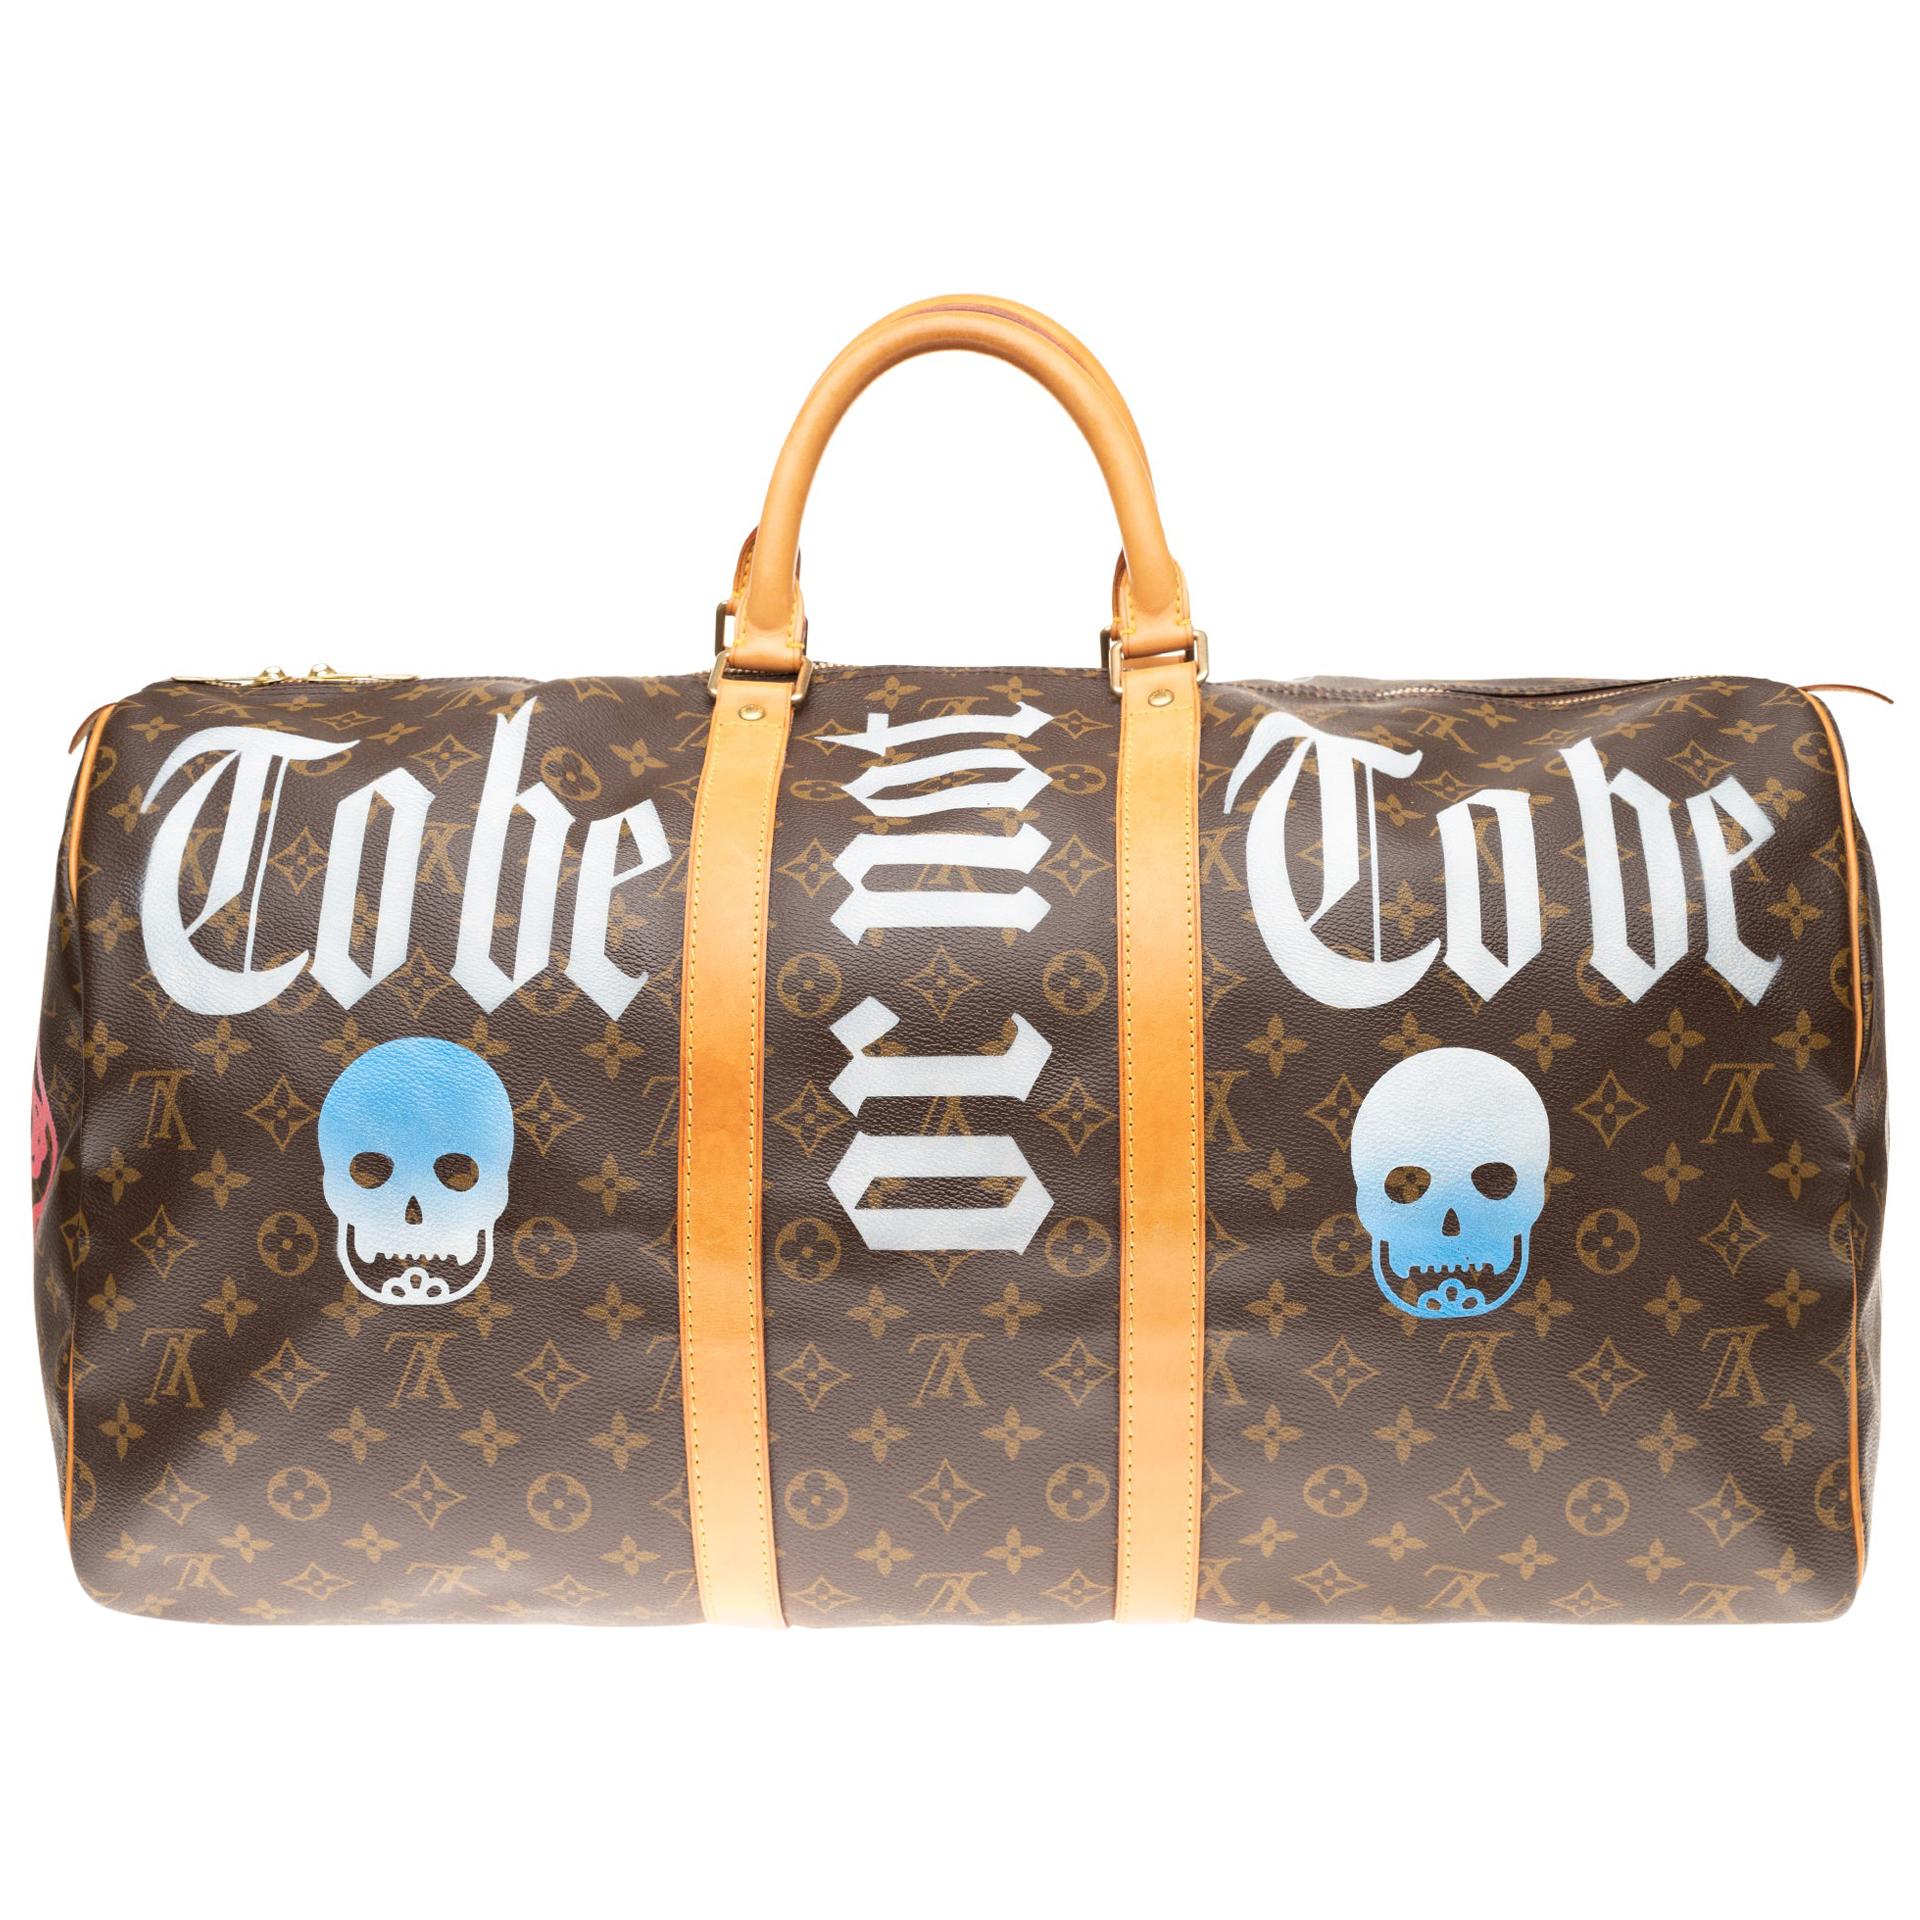 Travel bag Louis Vuitton Keepall 55 customized "Be or not to be " by PatBo!